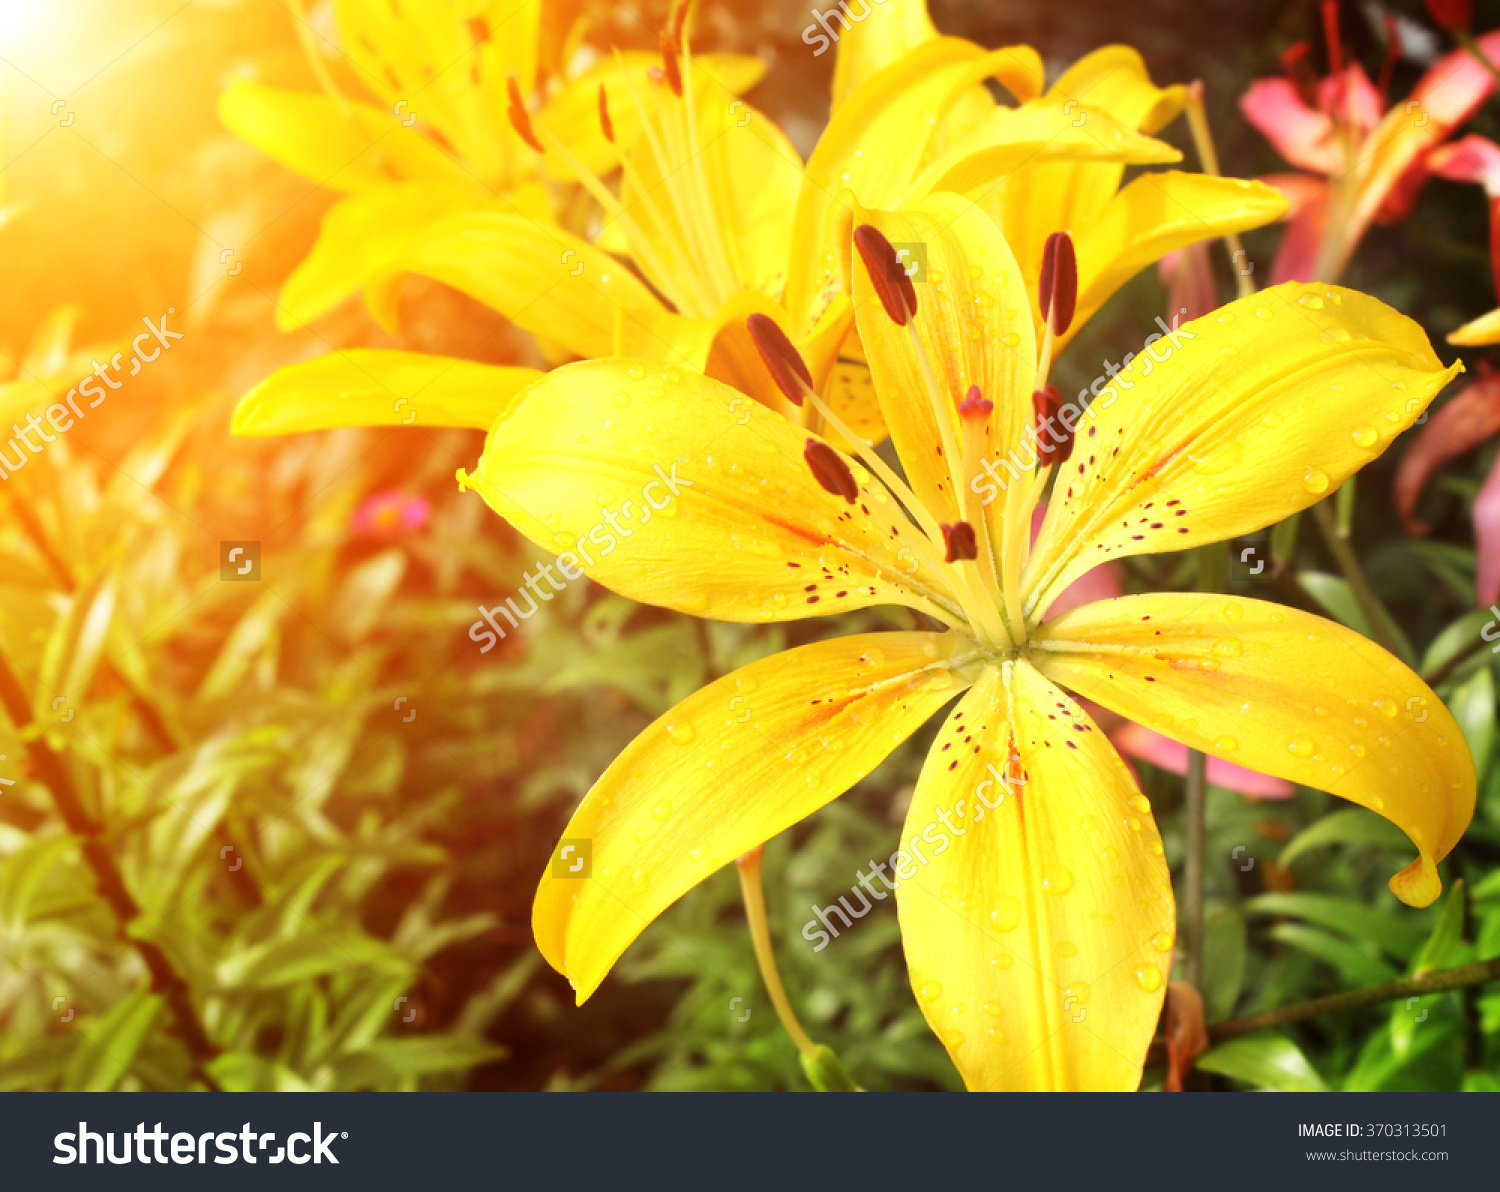 Beautiful Yellow Lilies With Raindrops On Petals Stock Photo.